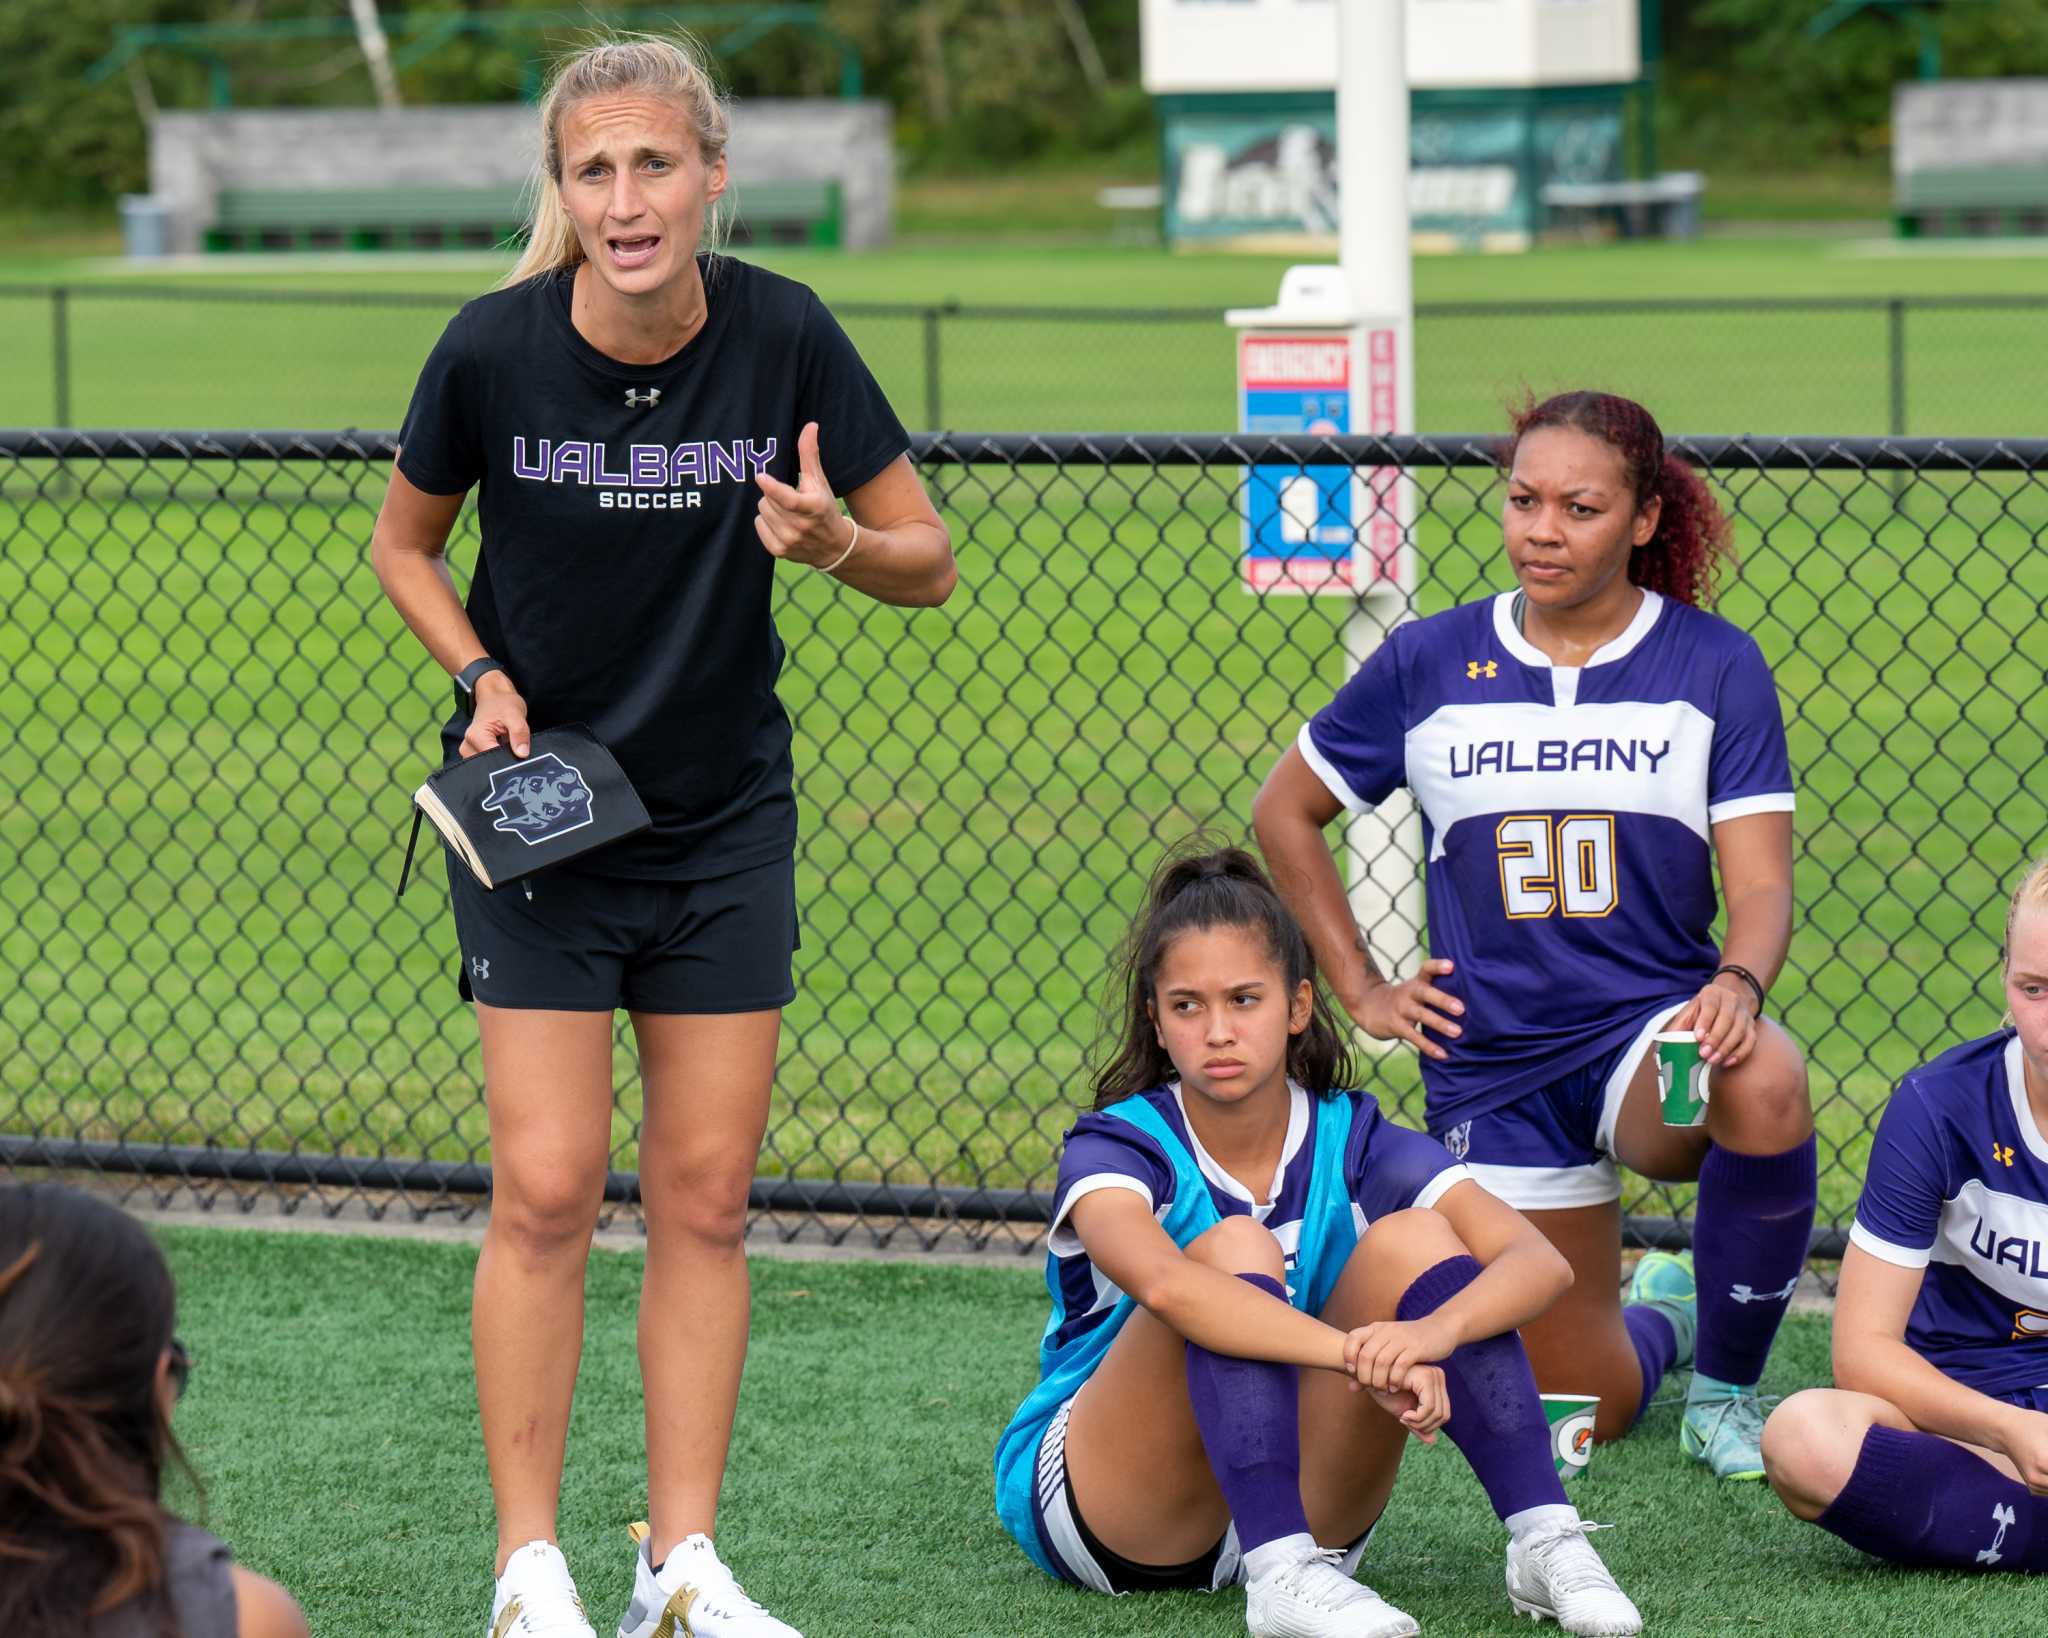 UAlbany women's soccer coach resigns